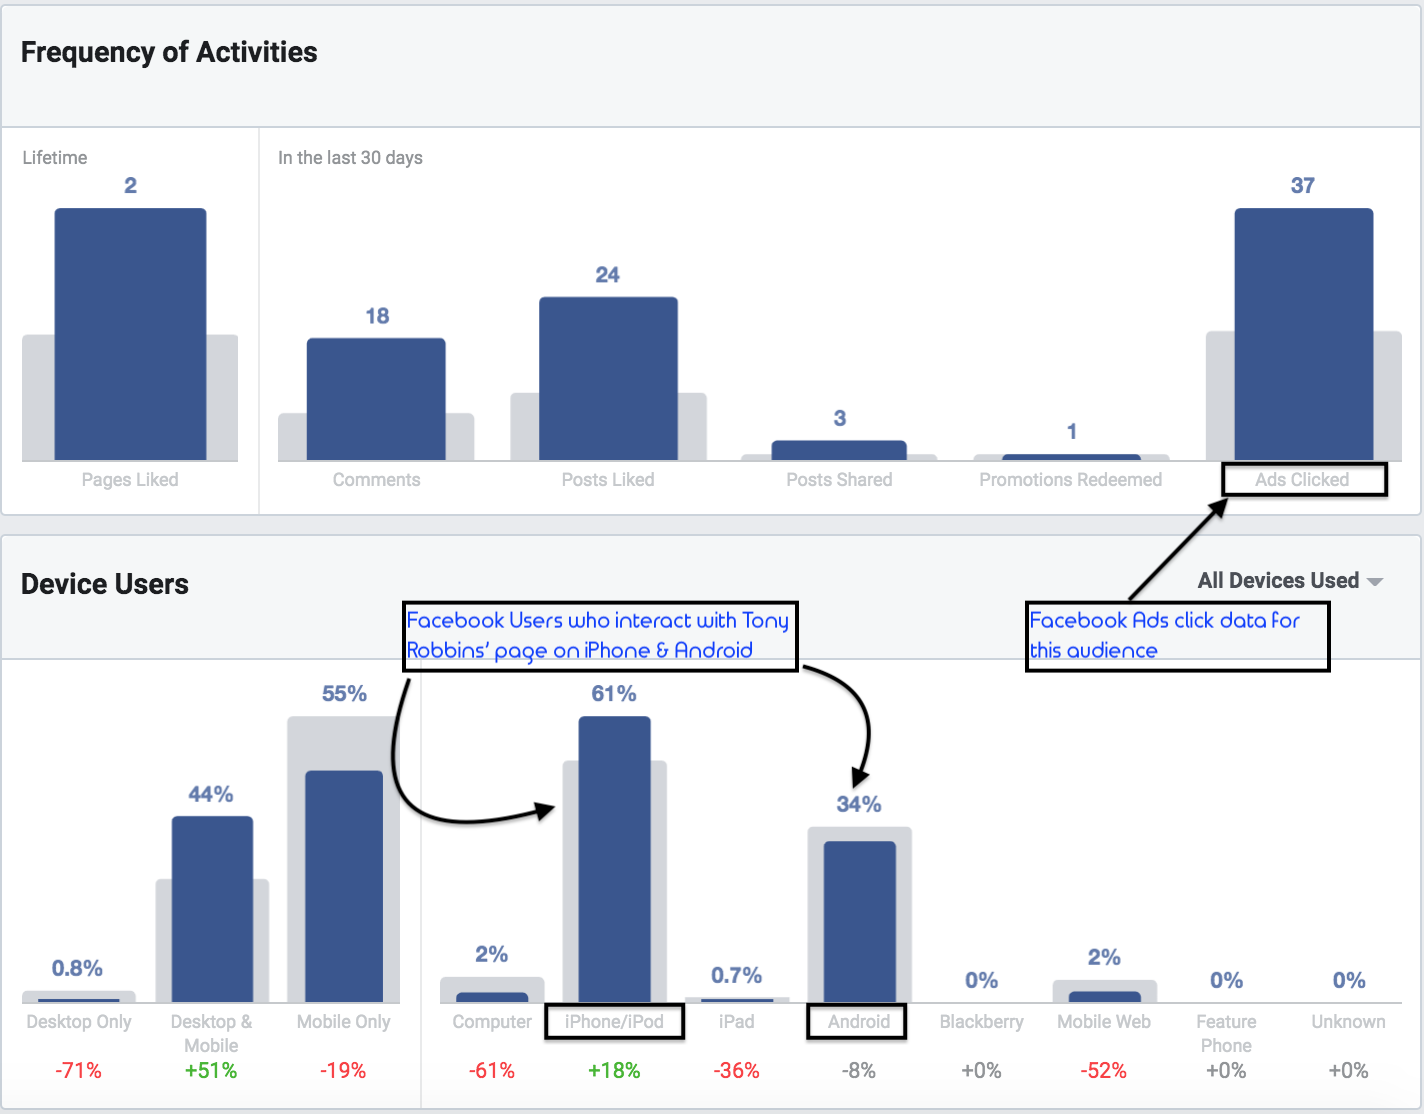 Facebook insight audience tool can show you frequency of activities.